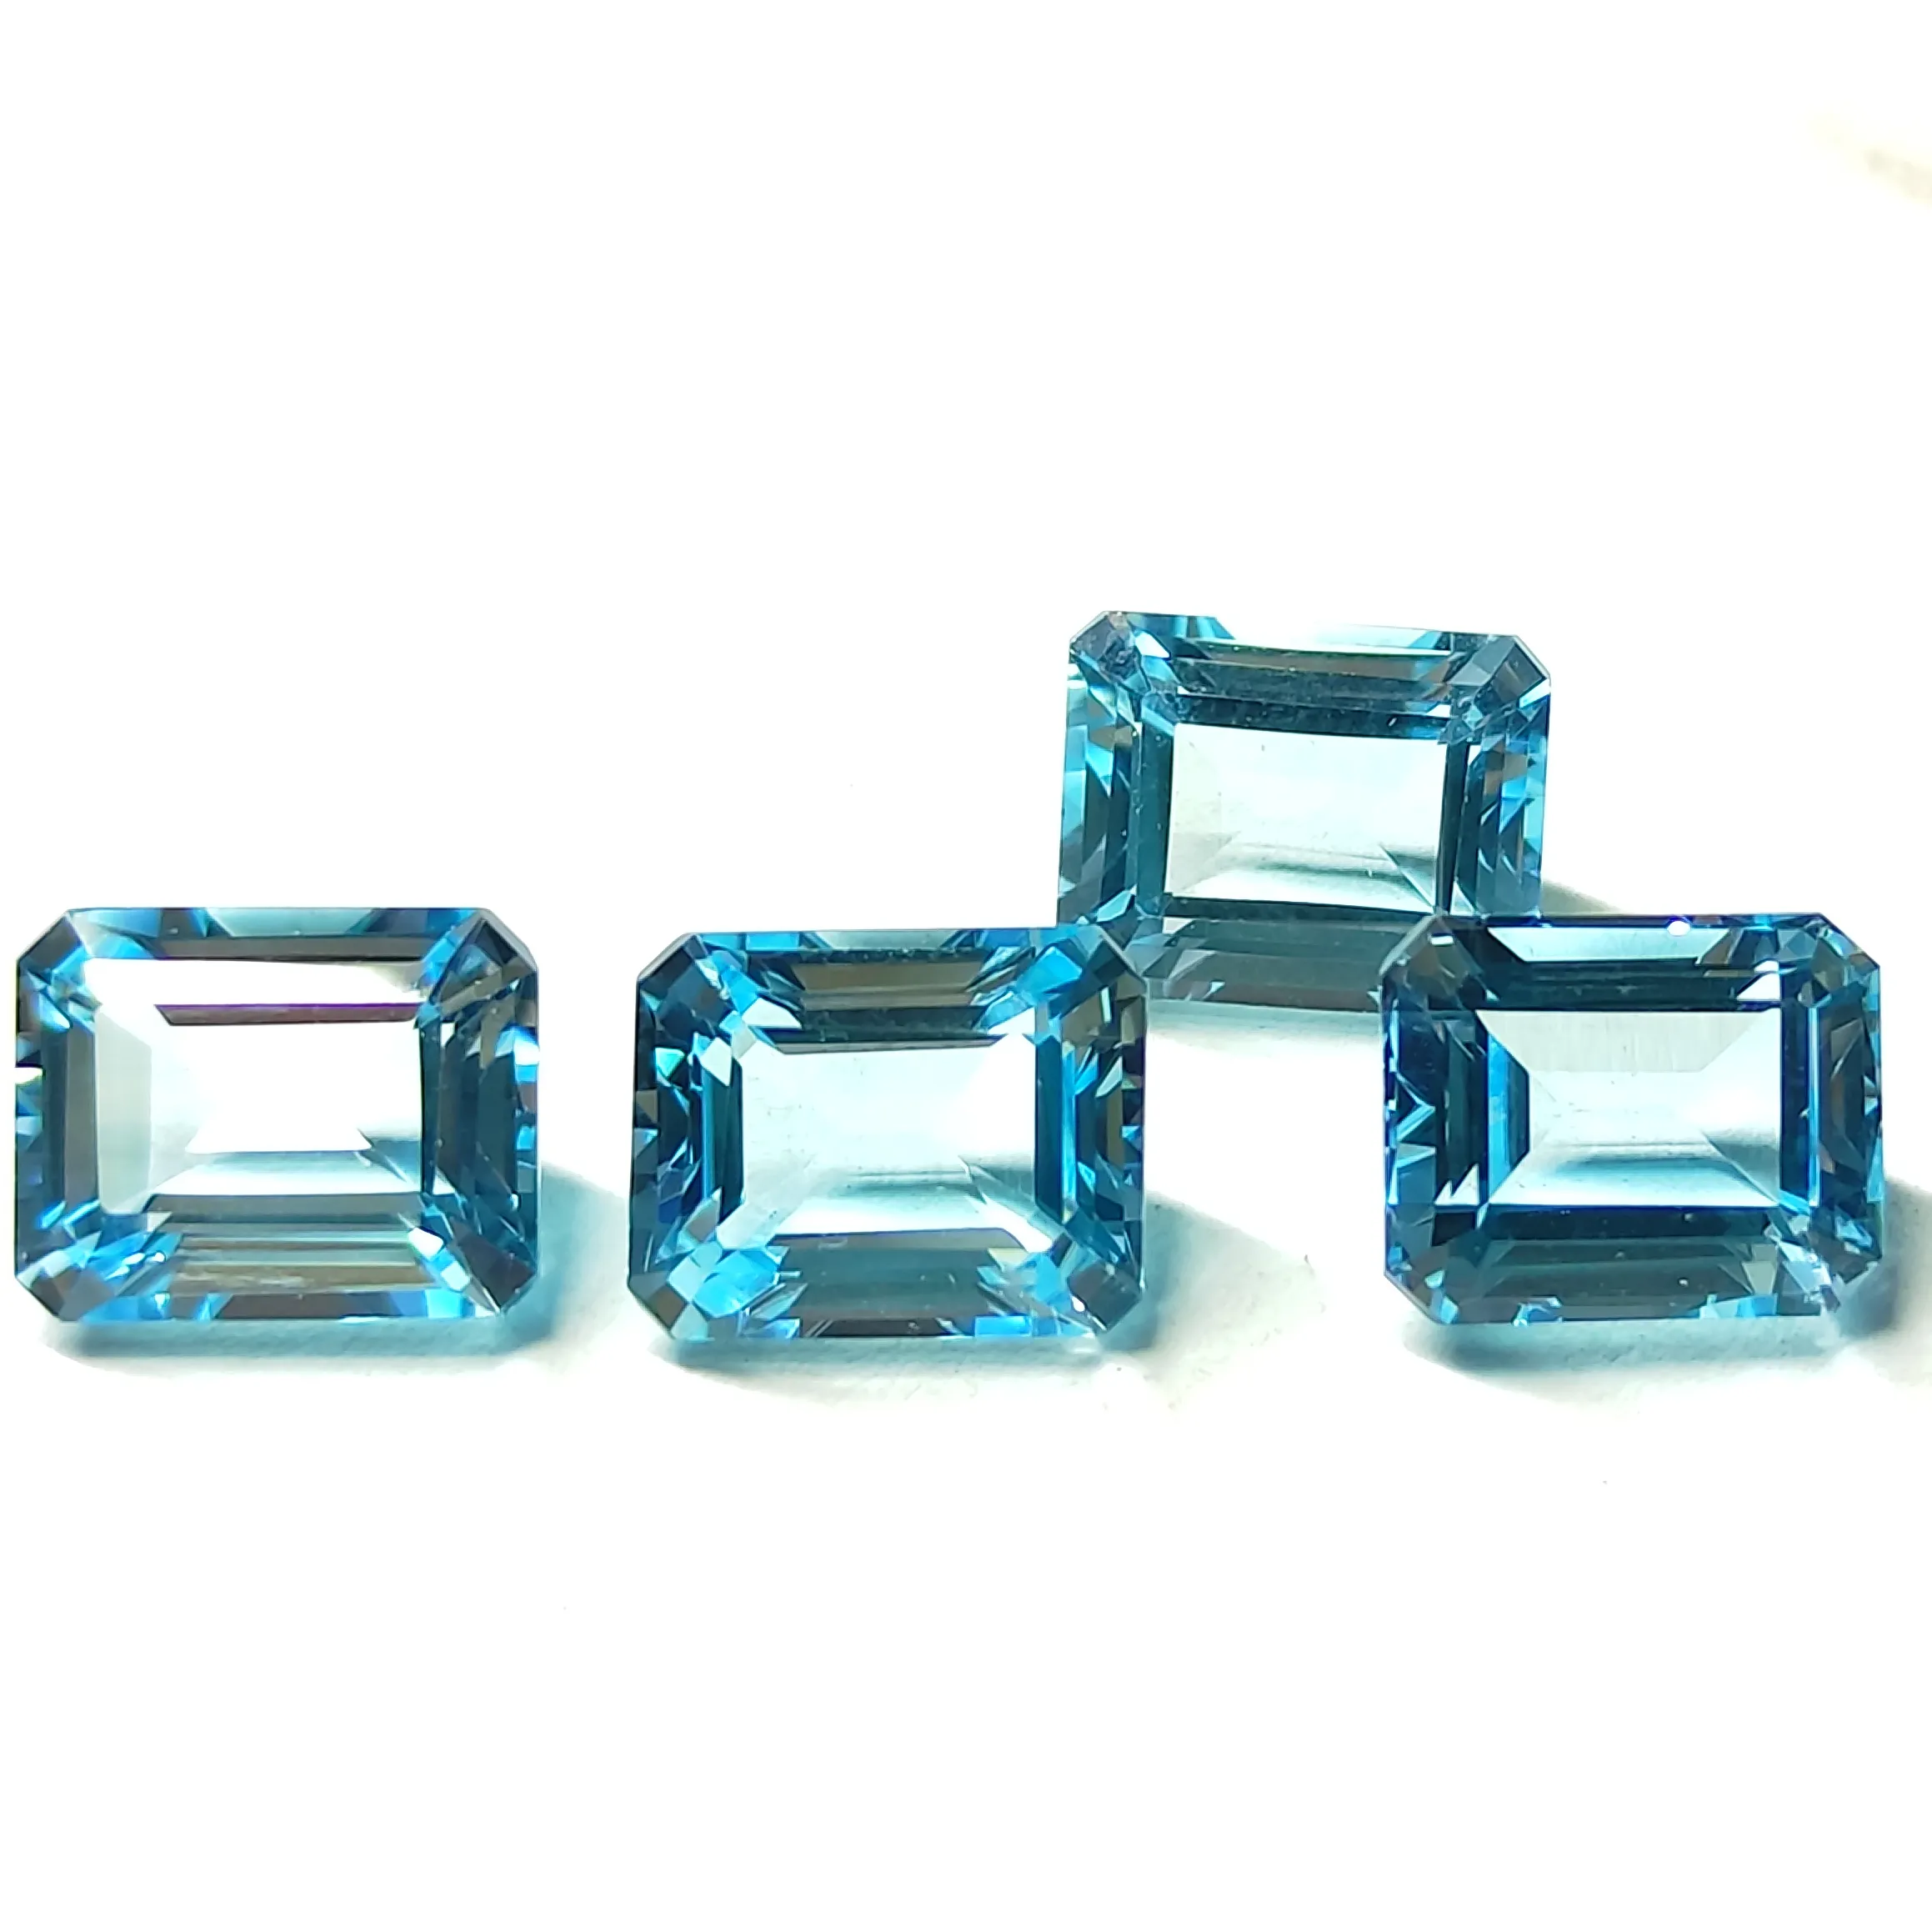 High Quality Sky Blue Topaz 6x4mm Faceted Emerald Cut Loose Topaz Gemstones At Wholesale price From Indian Manufacturer